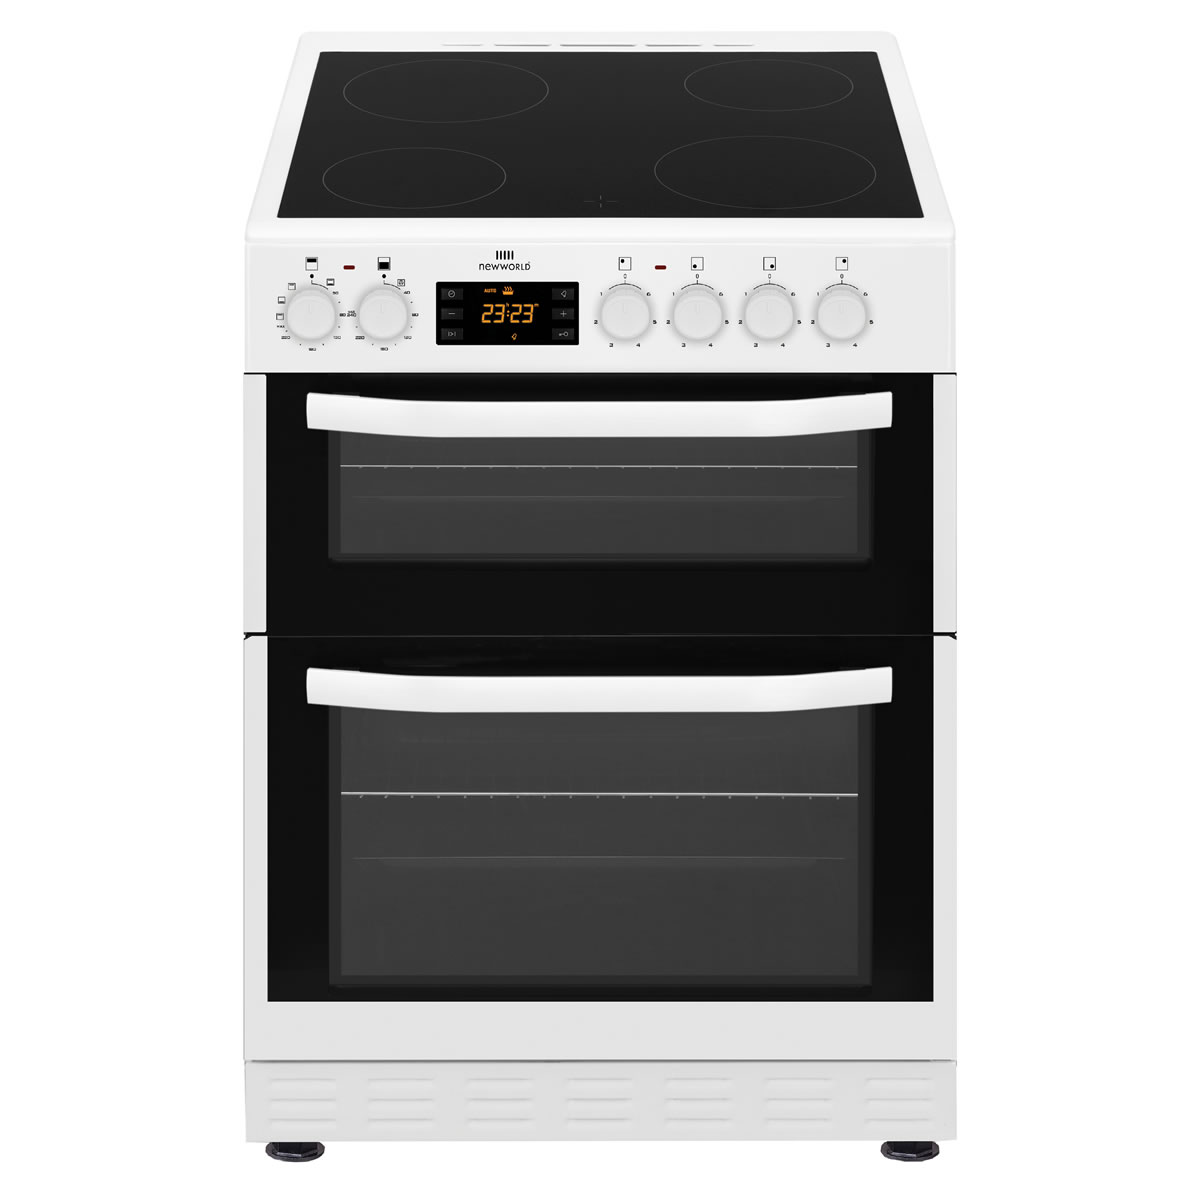 New-World 600mm Double Electric Cooker Ceramic Hob White